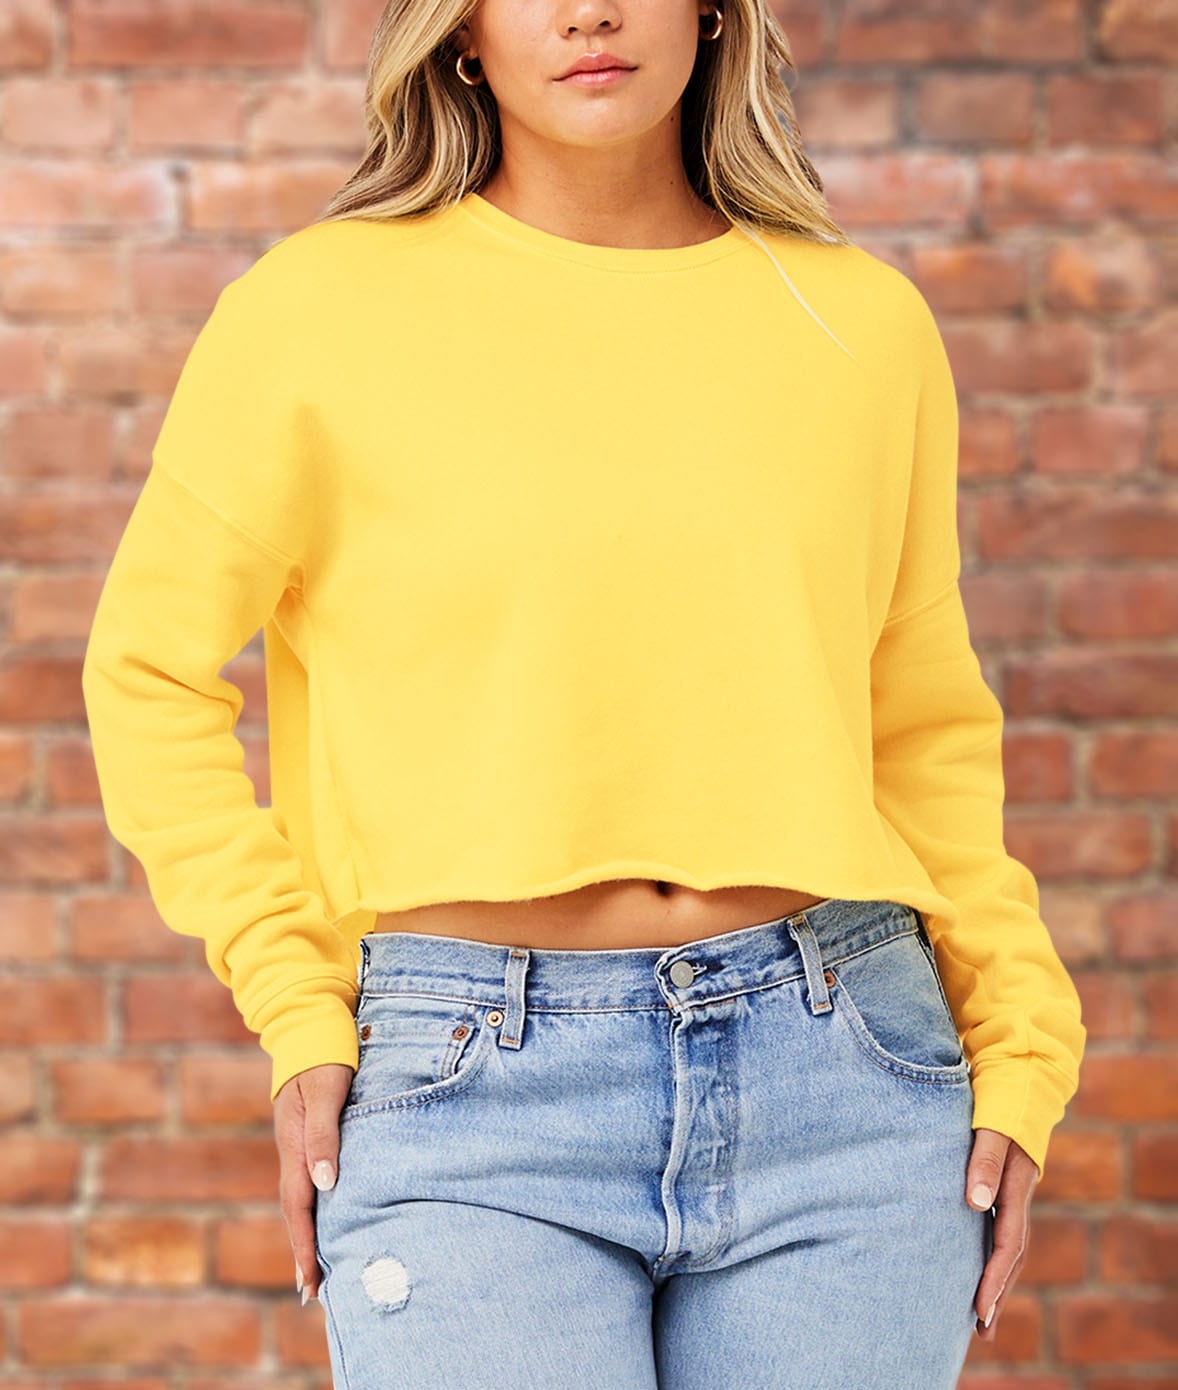 Women's Ridiculously Soft Cropped Sweatshirt Worn by Model